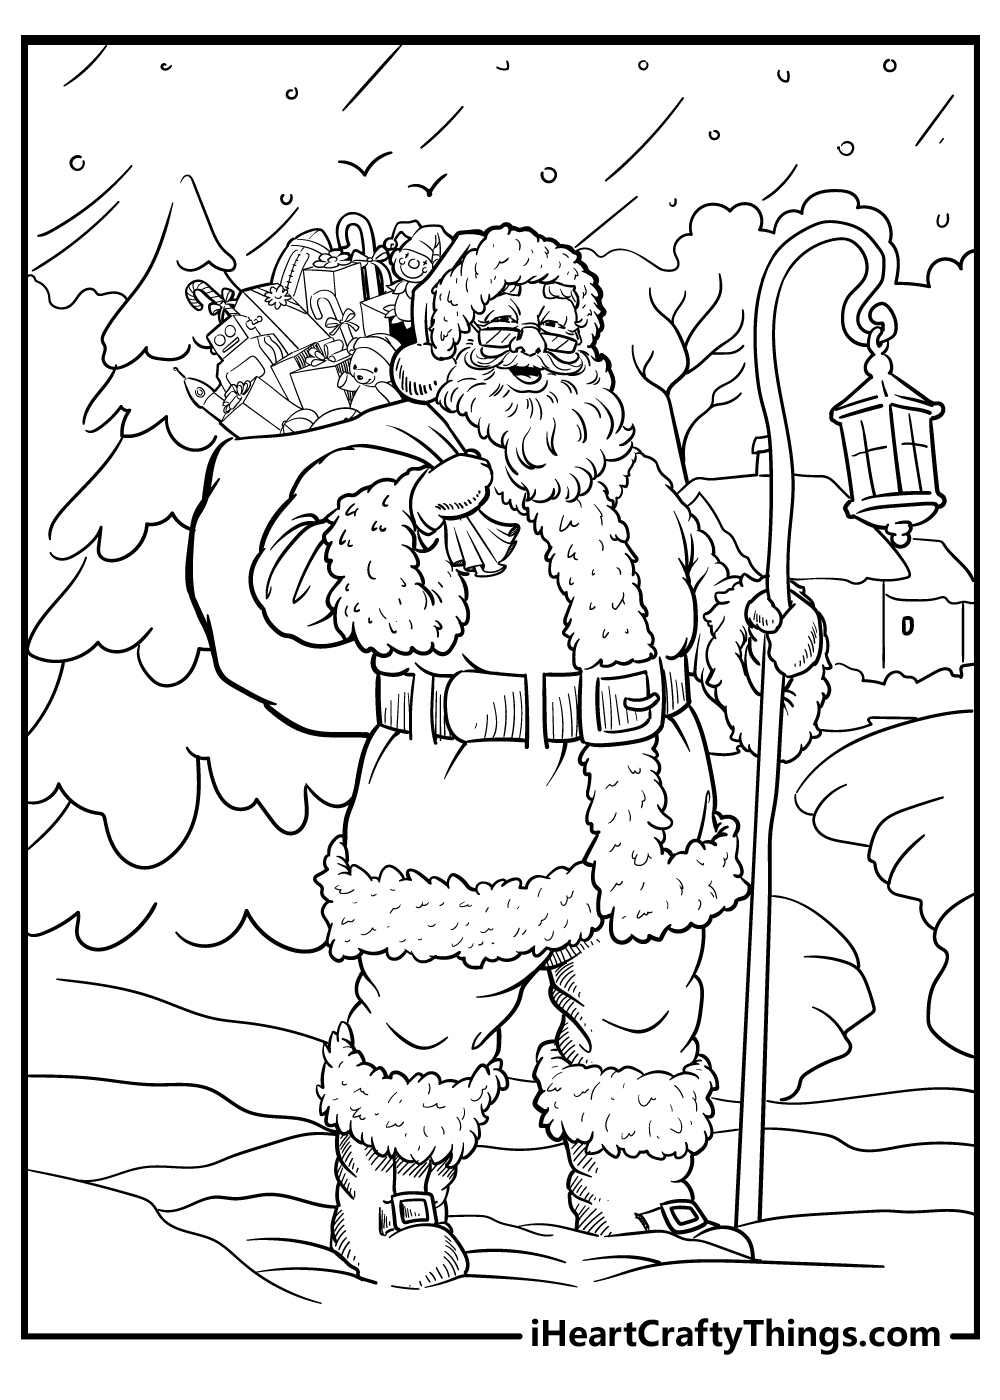 Instant Download Here Comes Santa Claus Digital Coloring Page